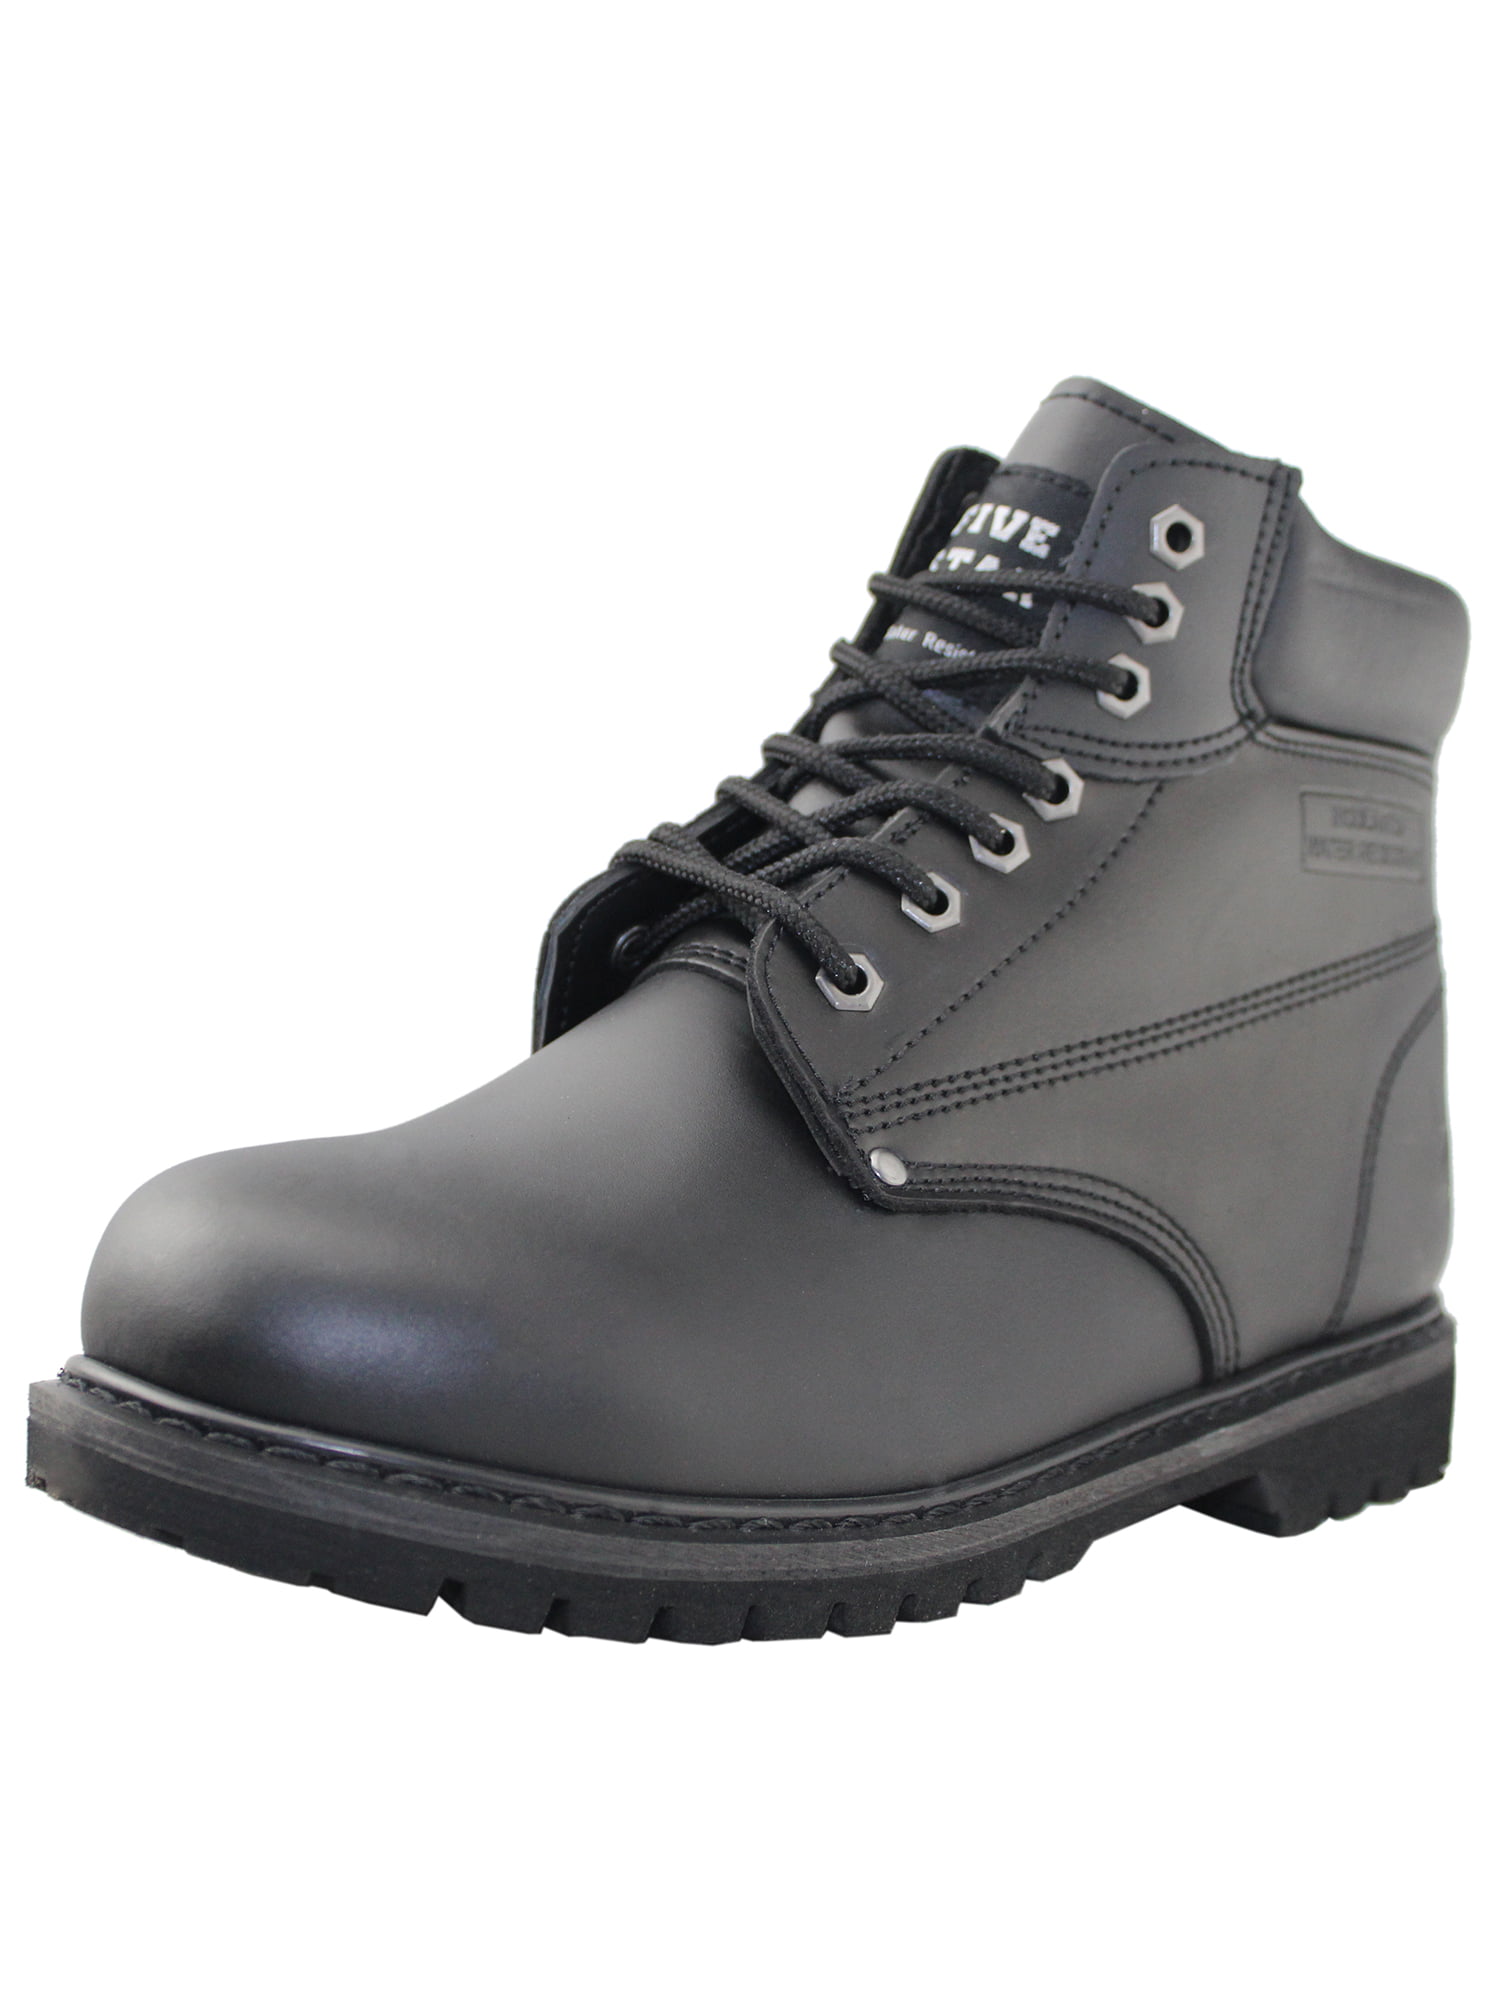 Ownshoe Men's Black Work Boots Insulted 